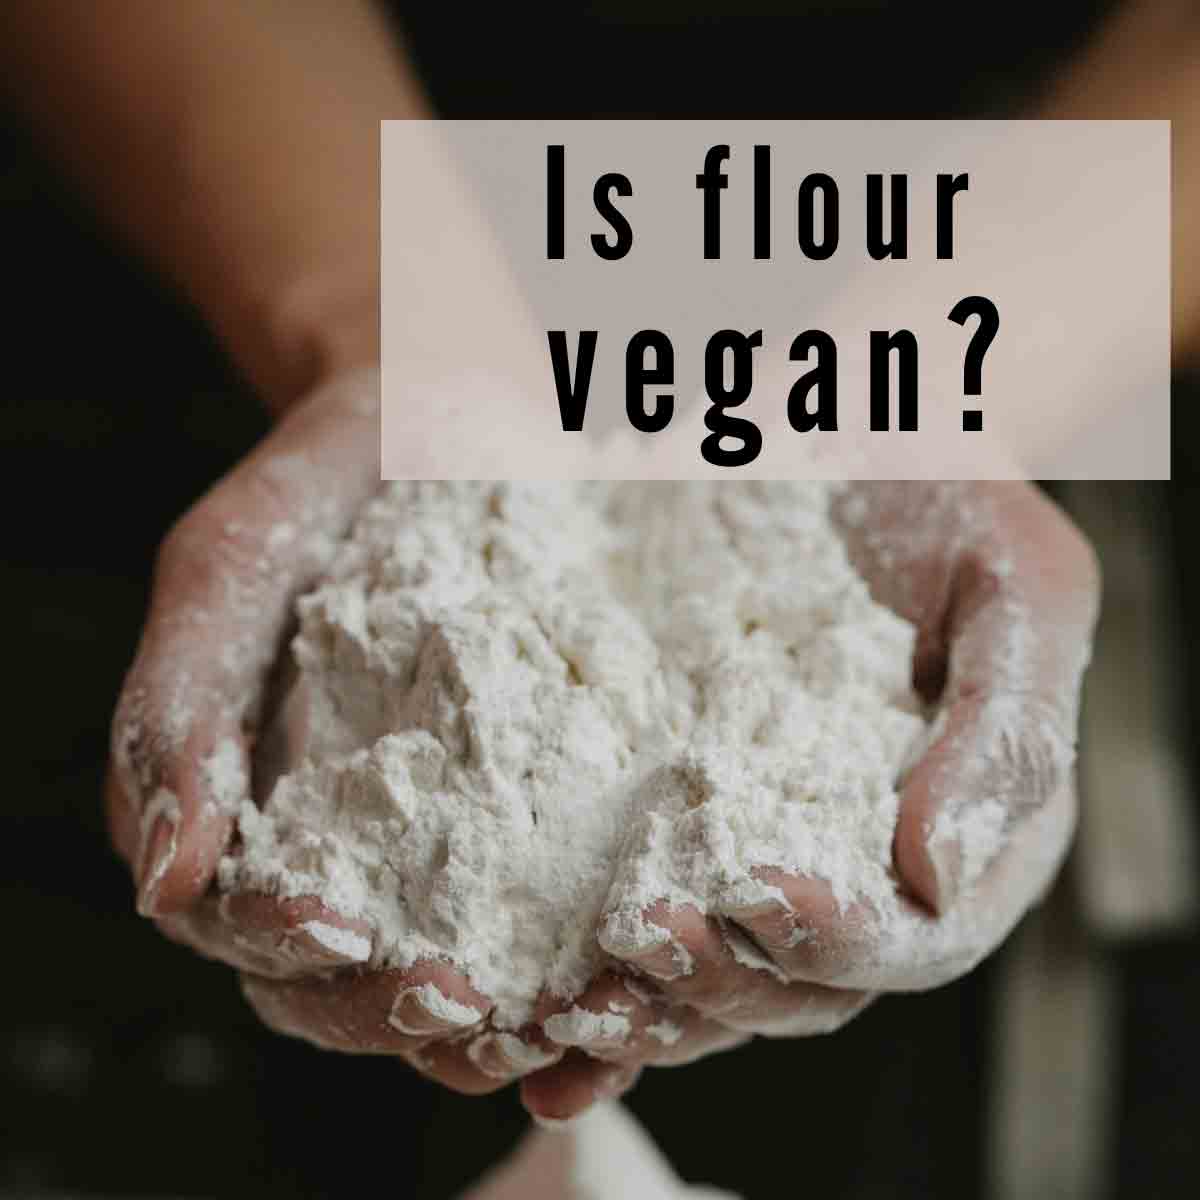 Image Of Flour In Hands With Text Overlay That Reads 'is Flour Vegan'